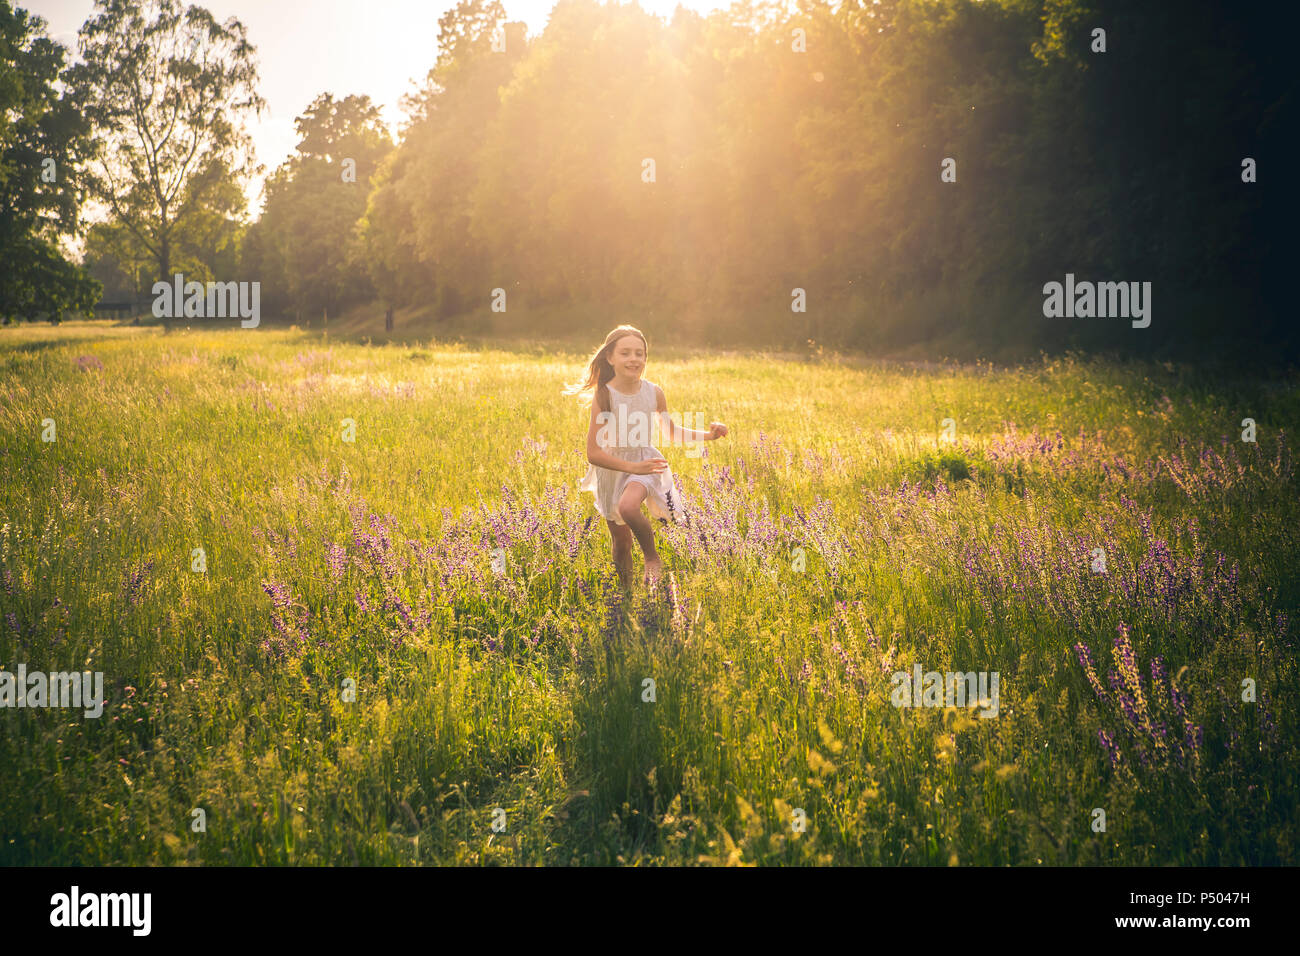 Smiling girl running on flower meadow at evening twilight Stock Photo